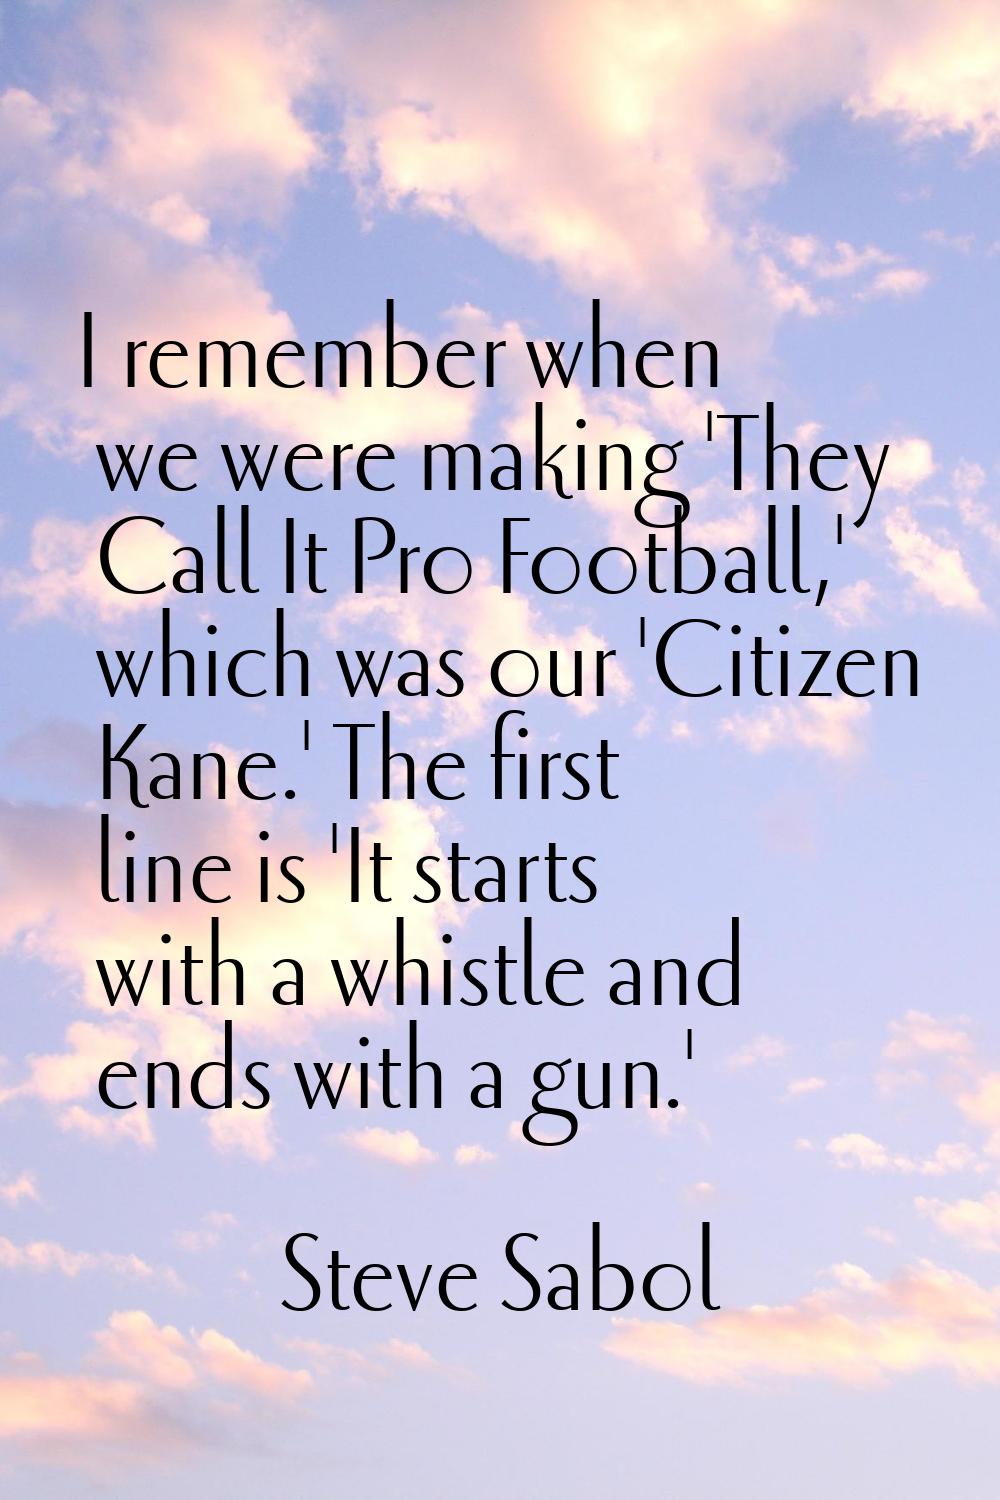 I remember when we were making 'They Call It Pro Football,' which was our 'Citizen Kane.' The first